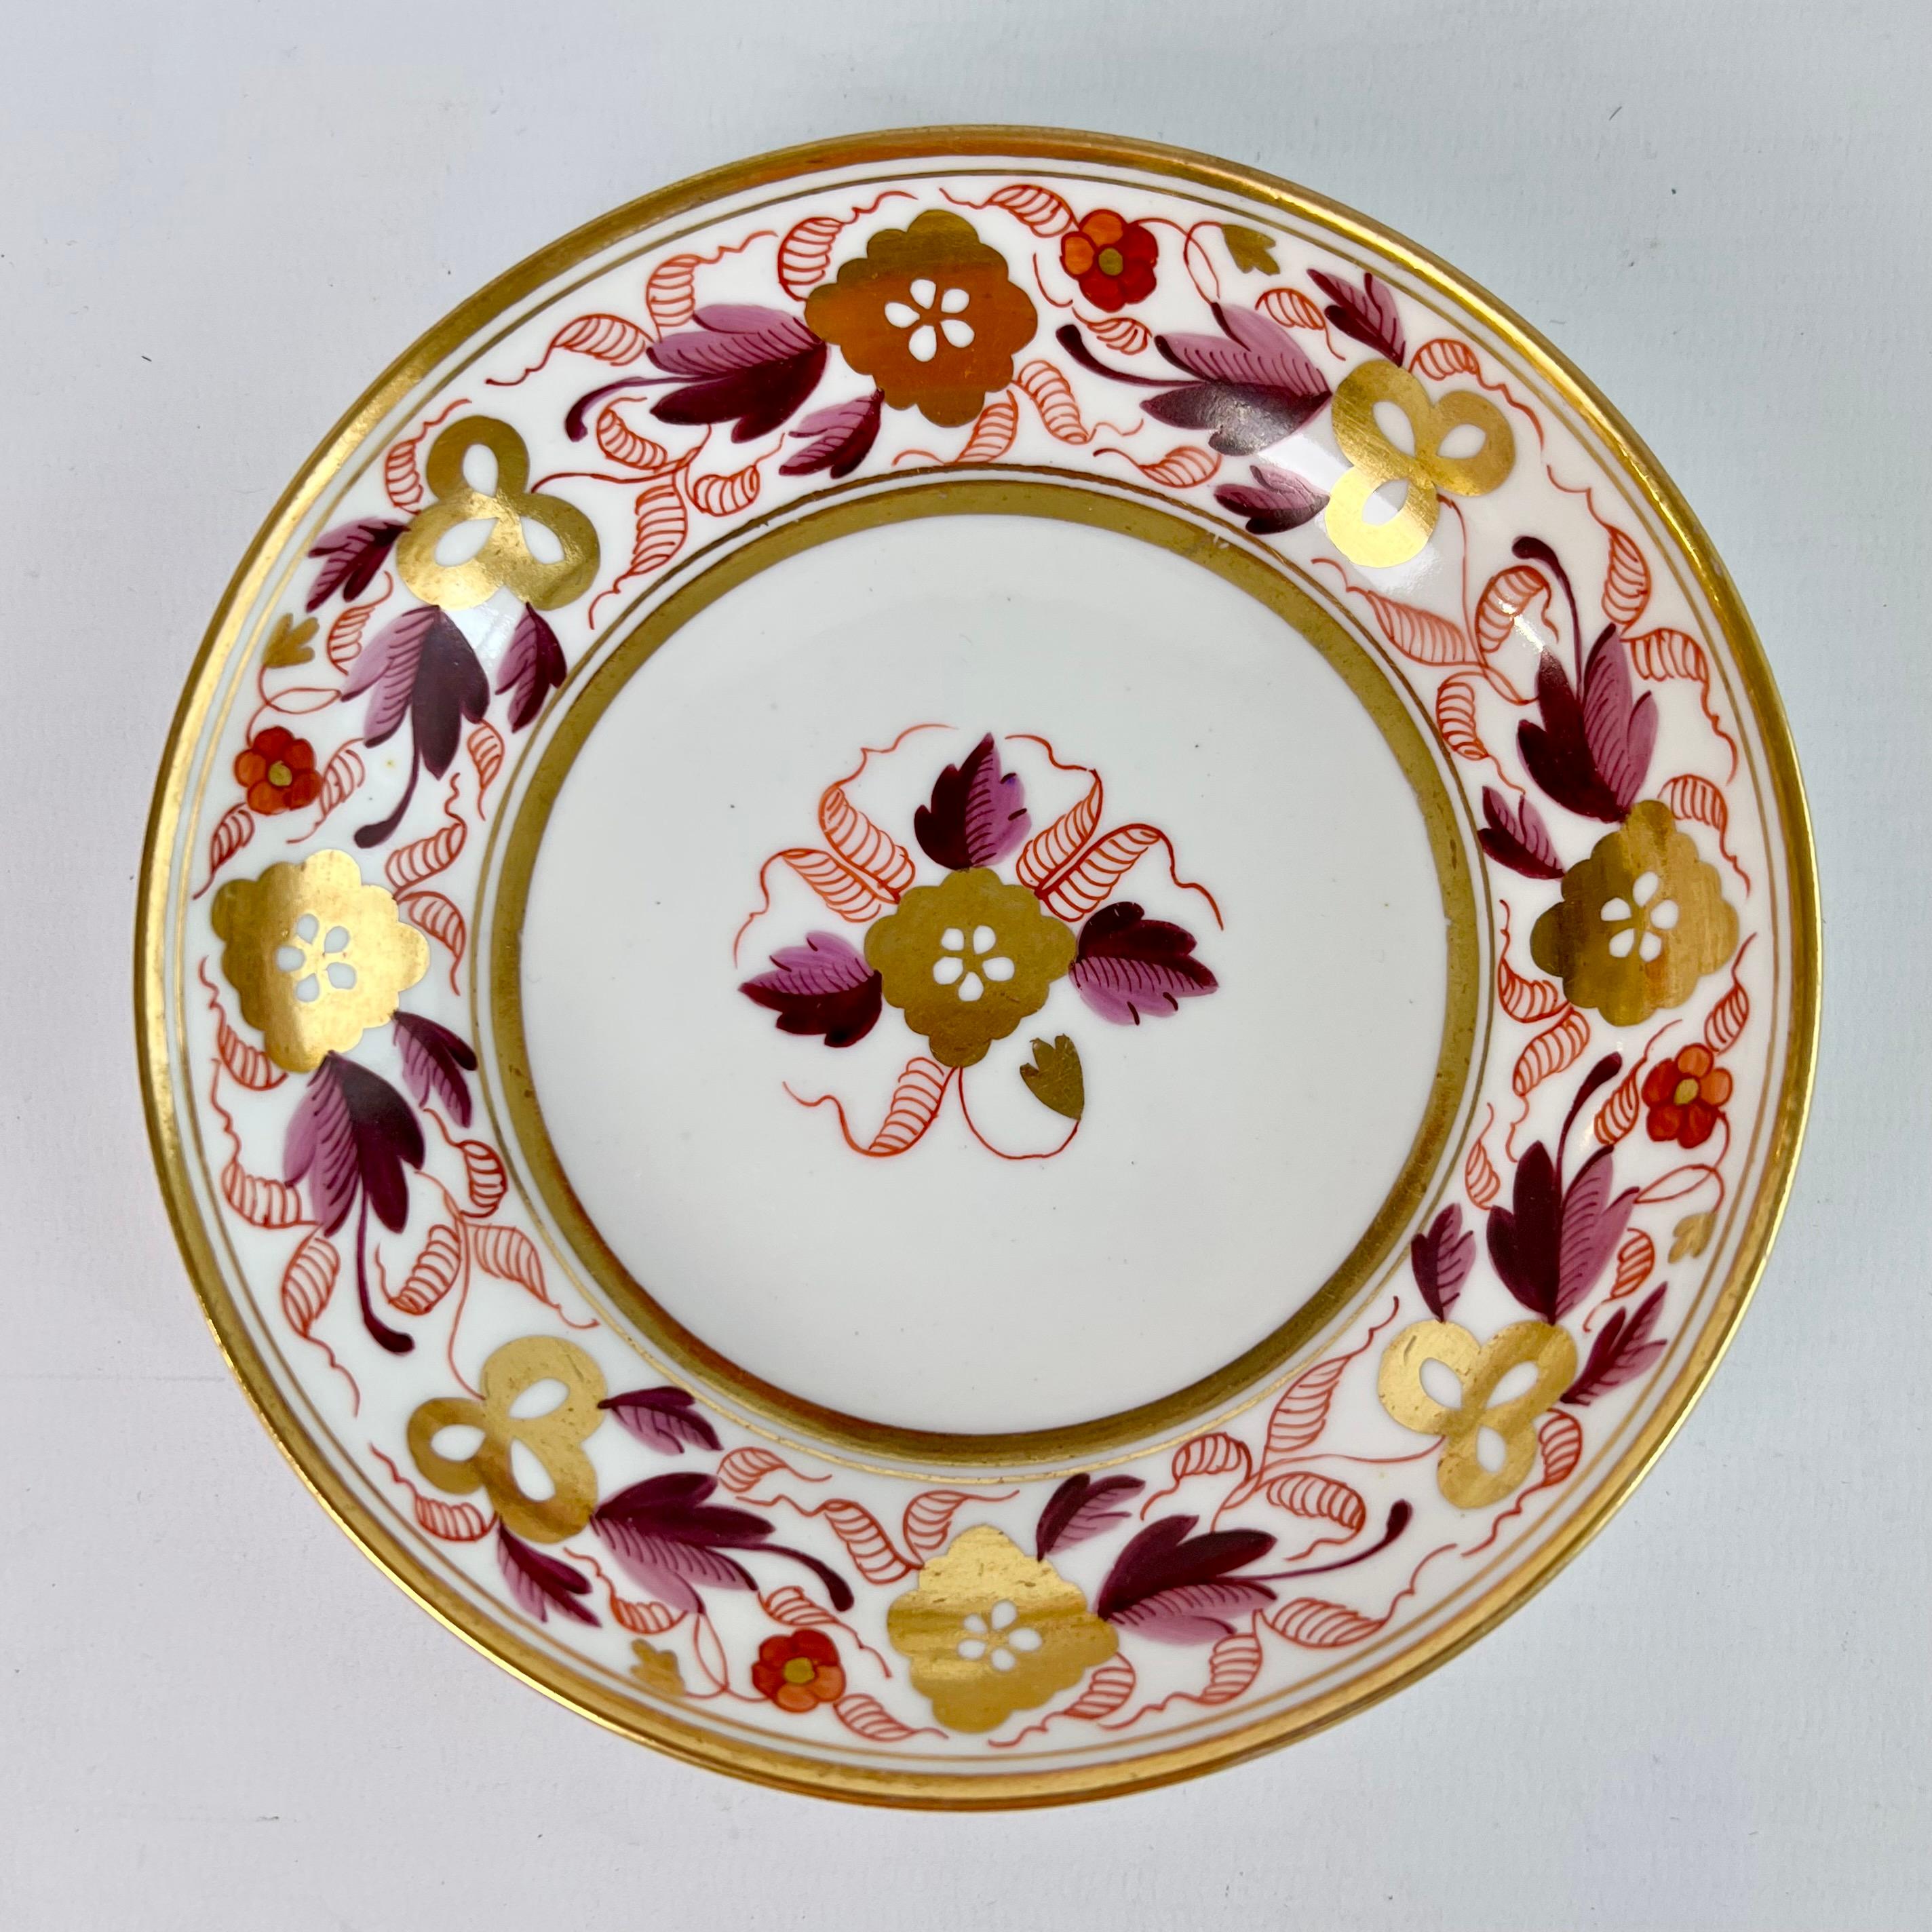 English Spode Porcelain Teacup Trio, Puce and Gilt Floral Pattern, Neoclassical ca 1810